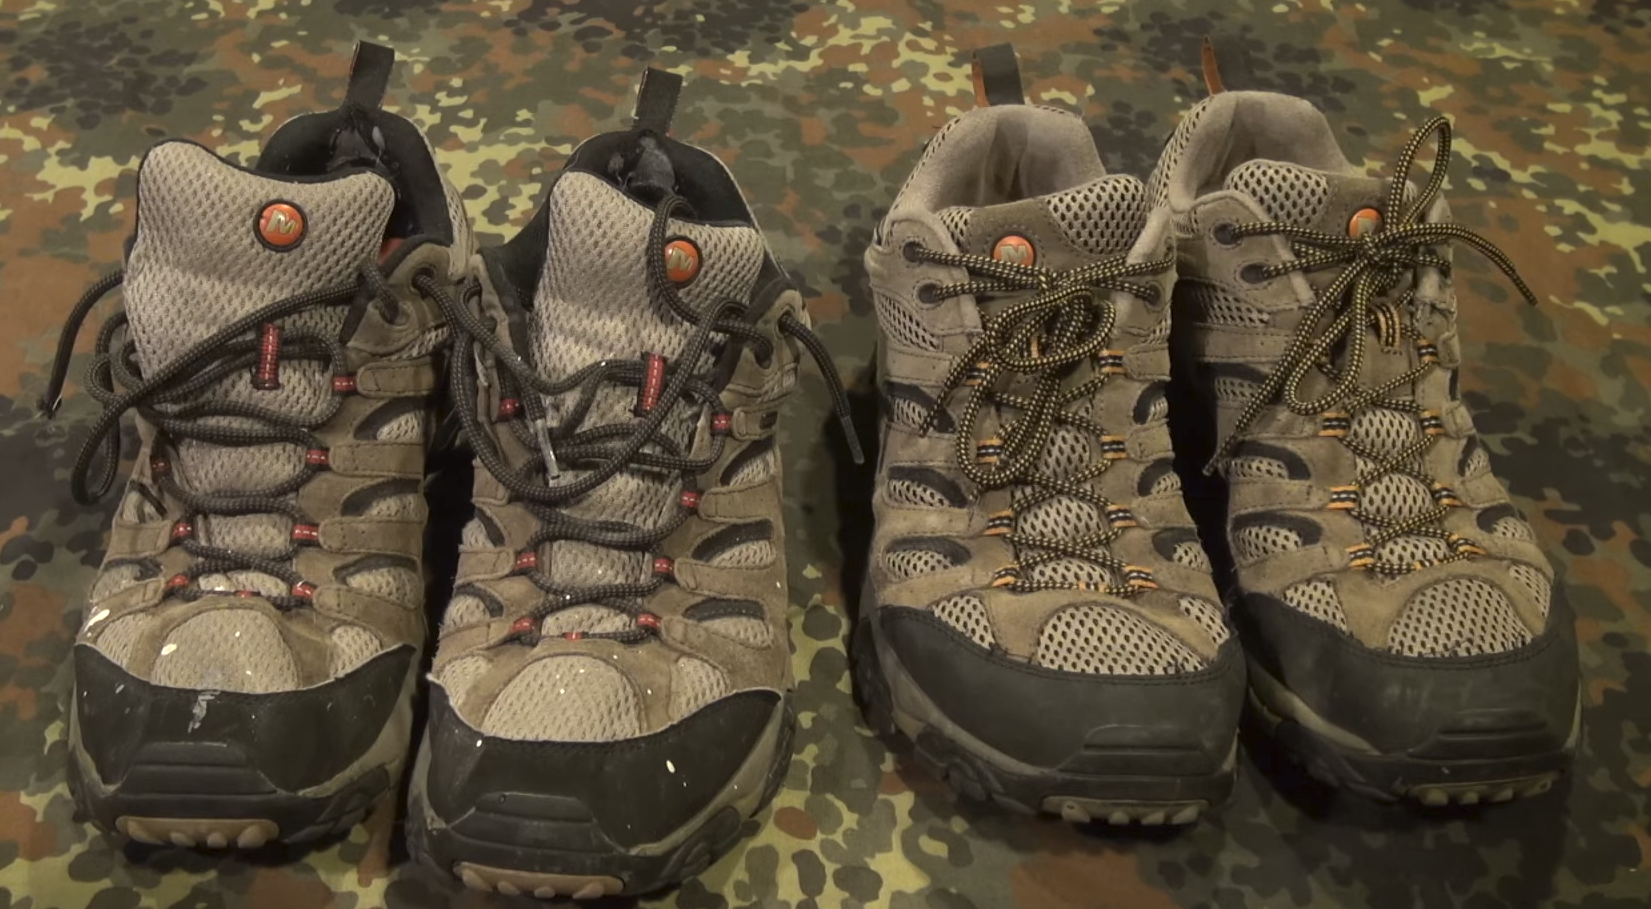 The Best Hiking Boots - We reviewed all different features and products